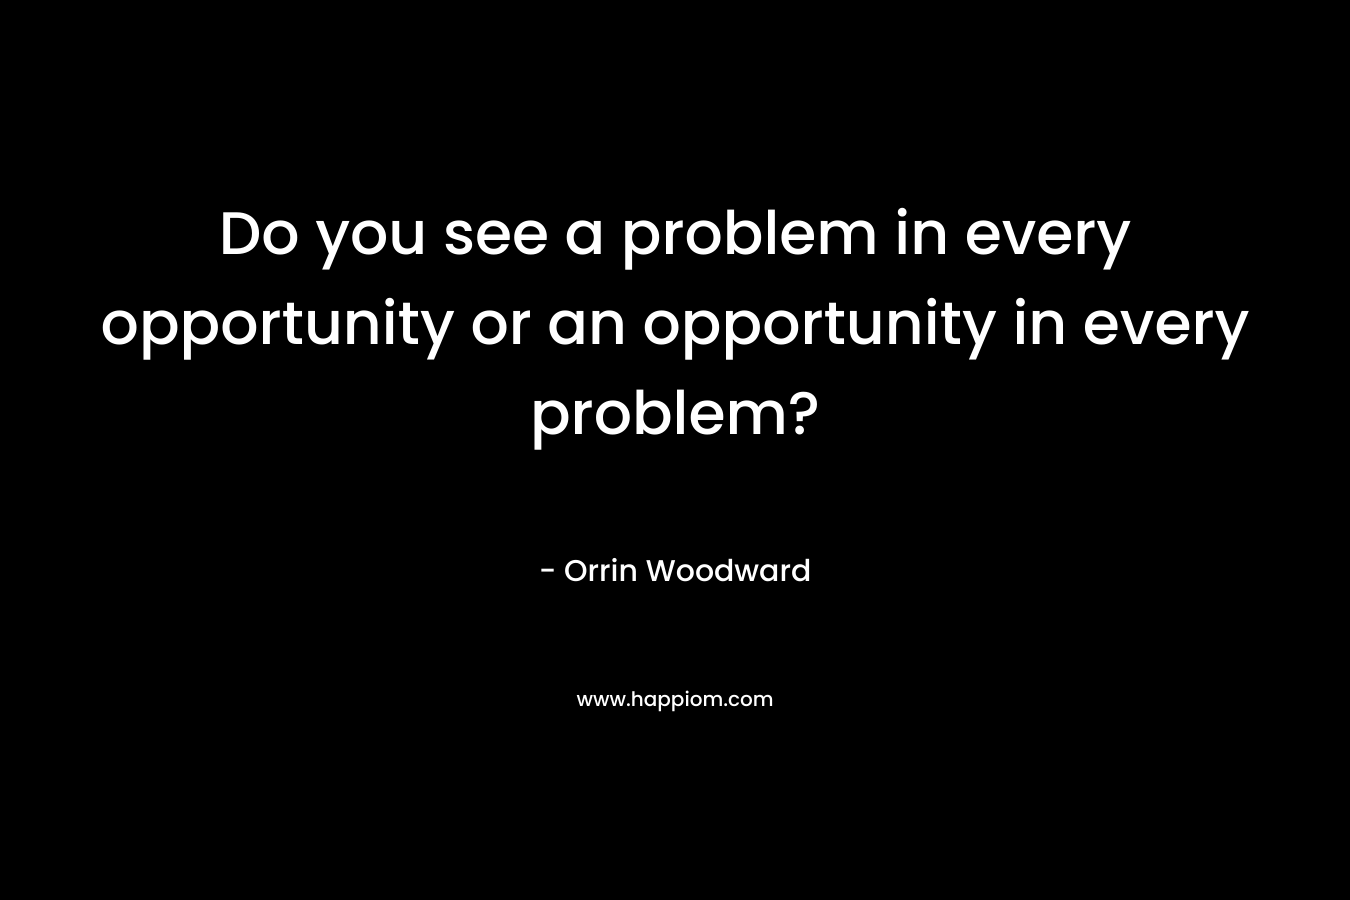 Do you see a problem in every opportunity or an opportunity in every problem?